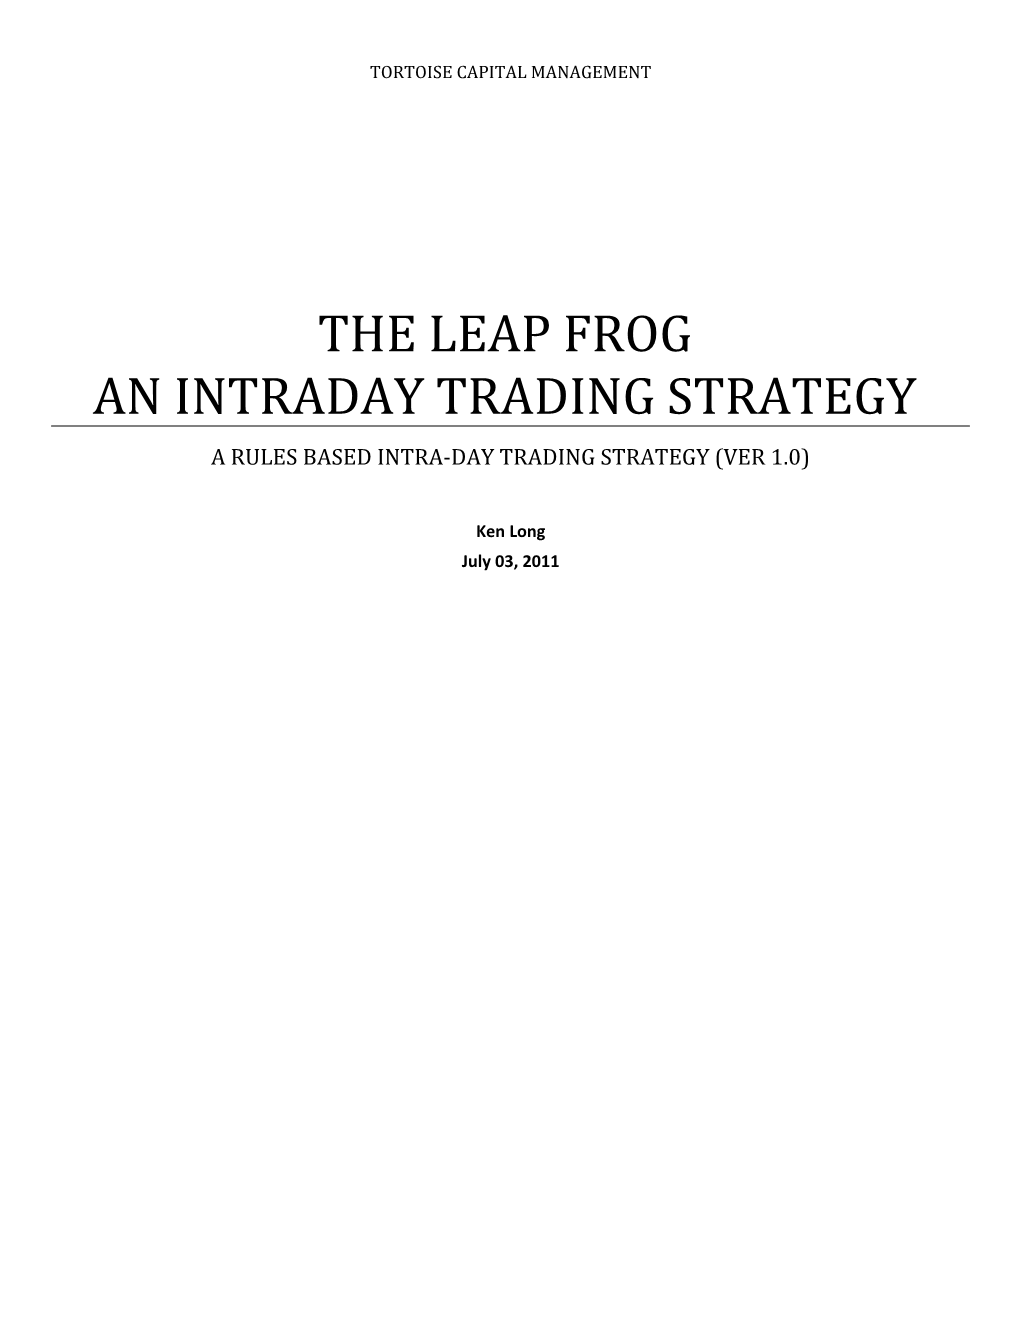 The Slow Frog Intraday Trading Strategy